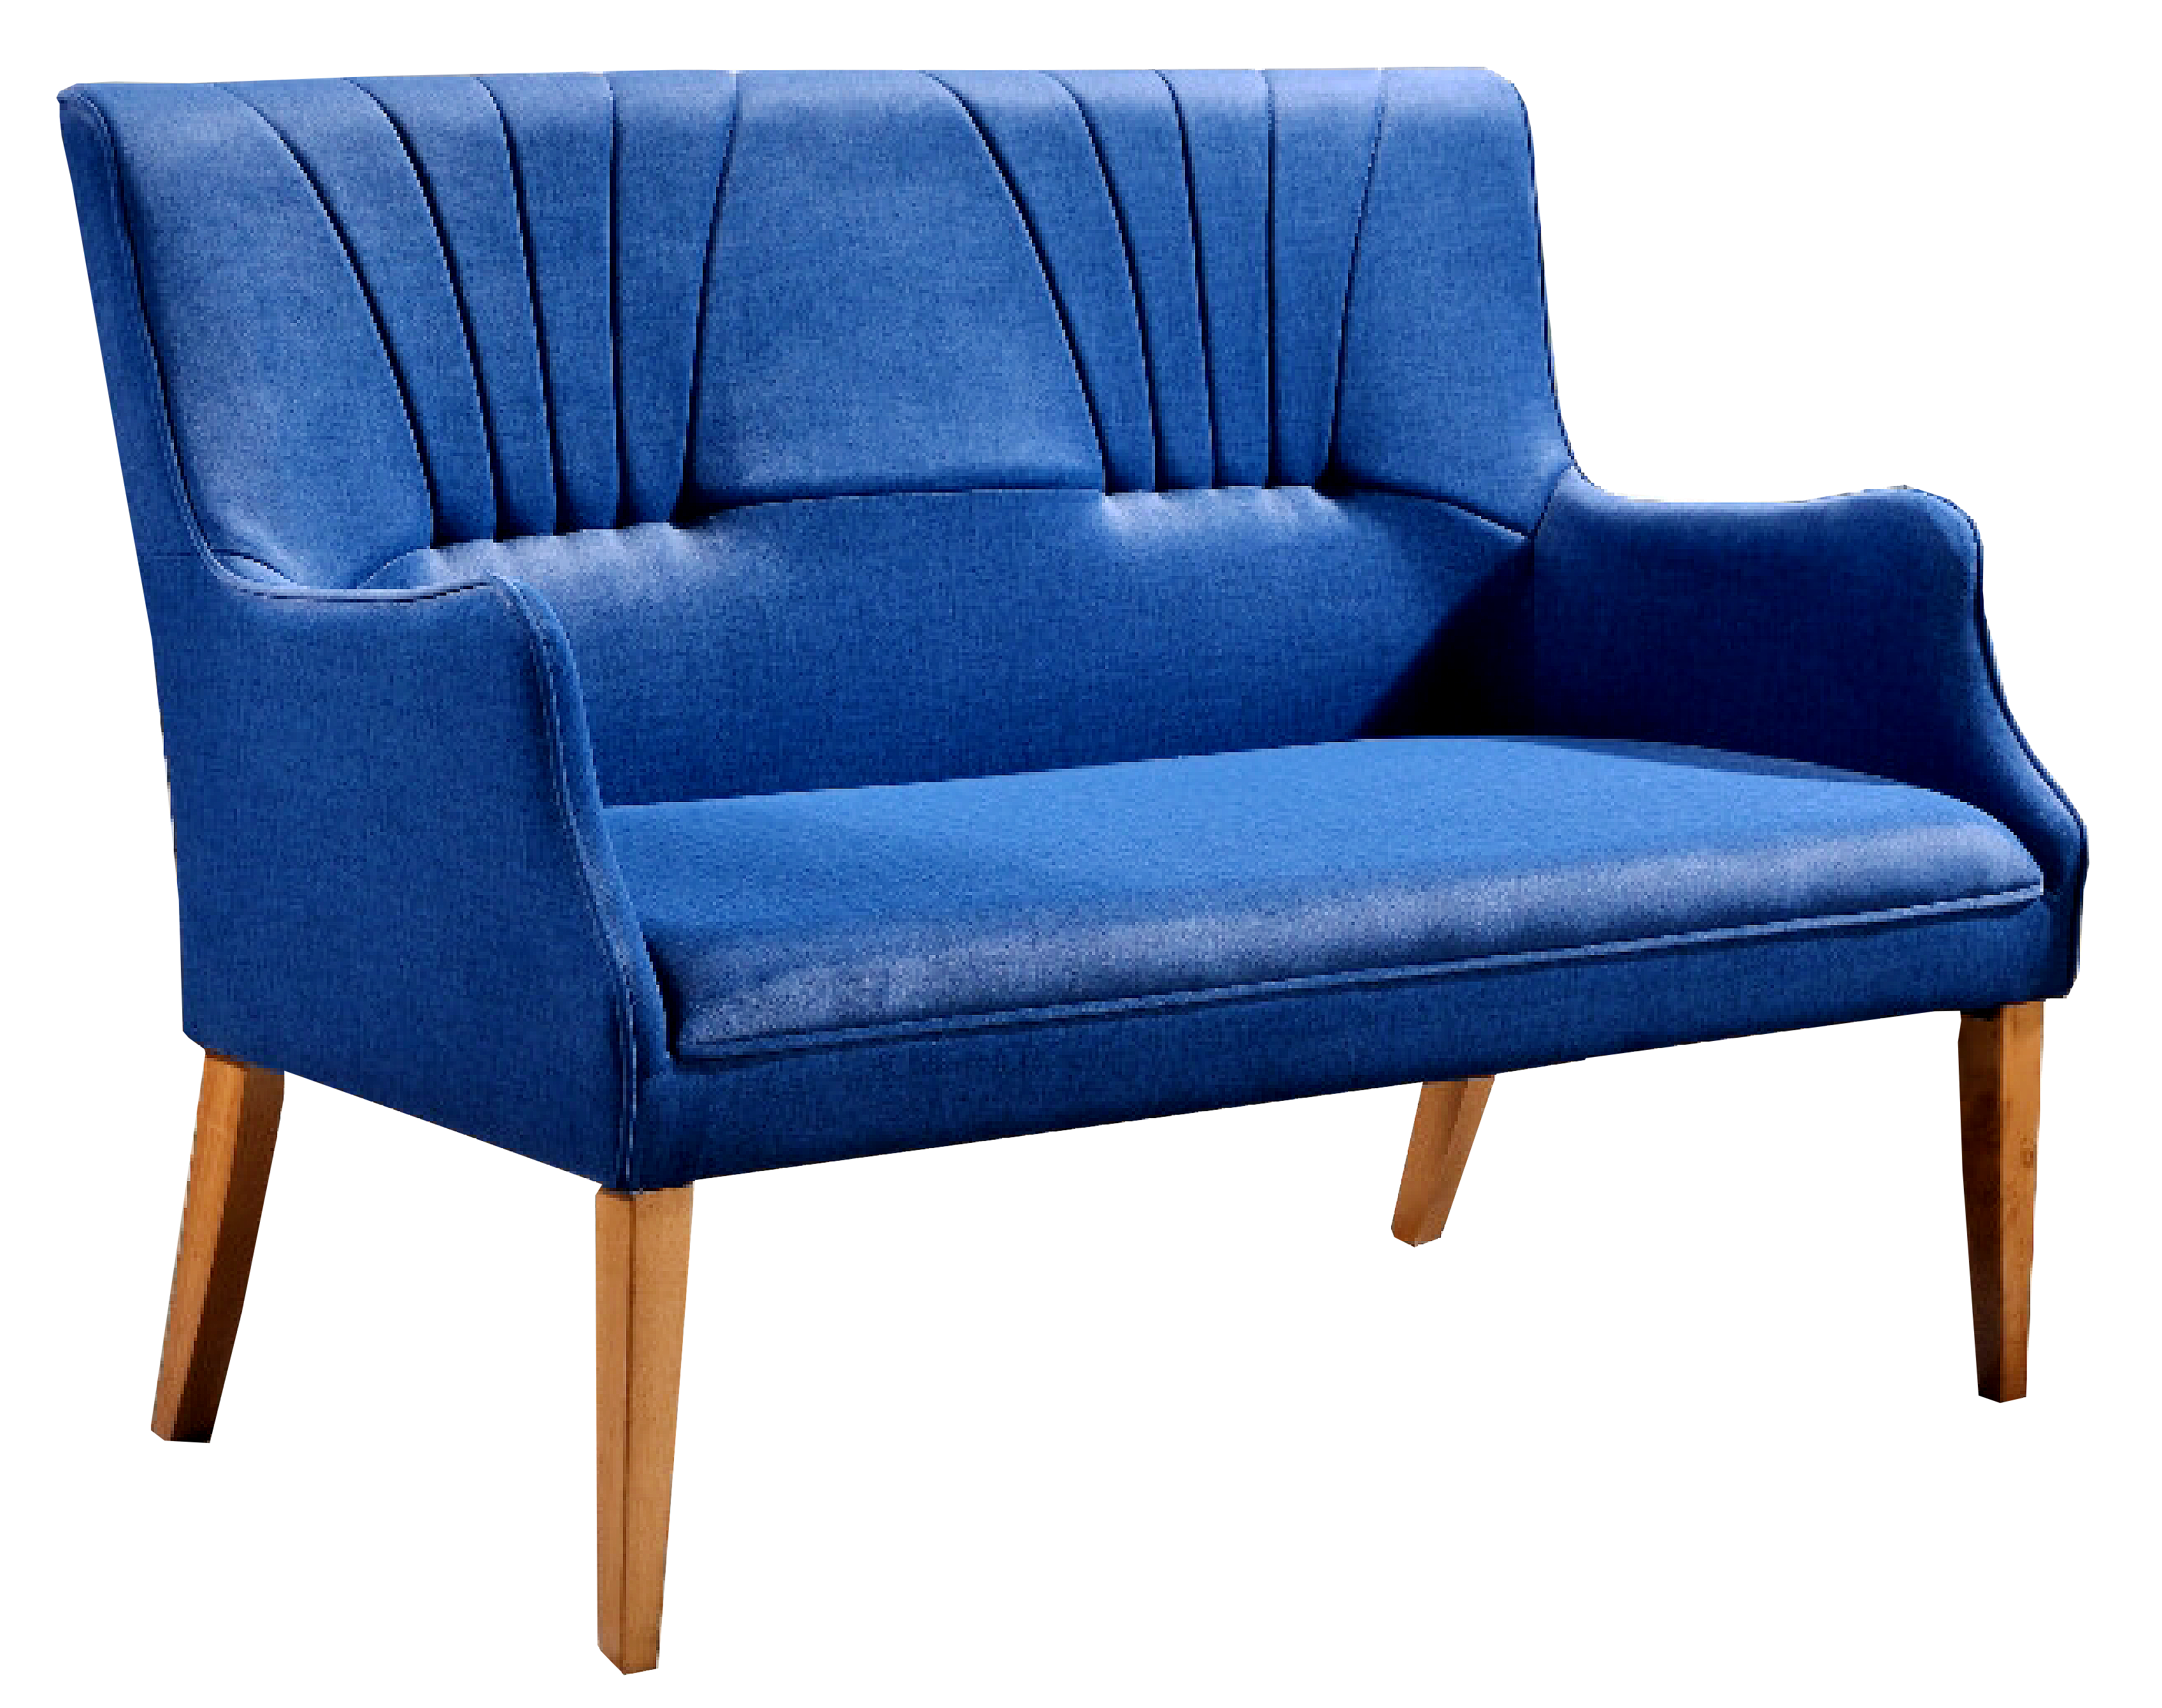 2 Seater Chair(blue)